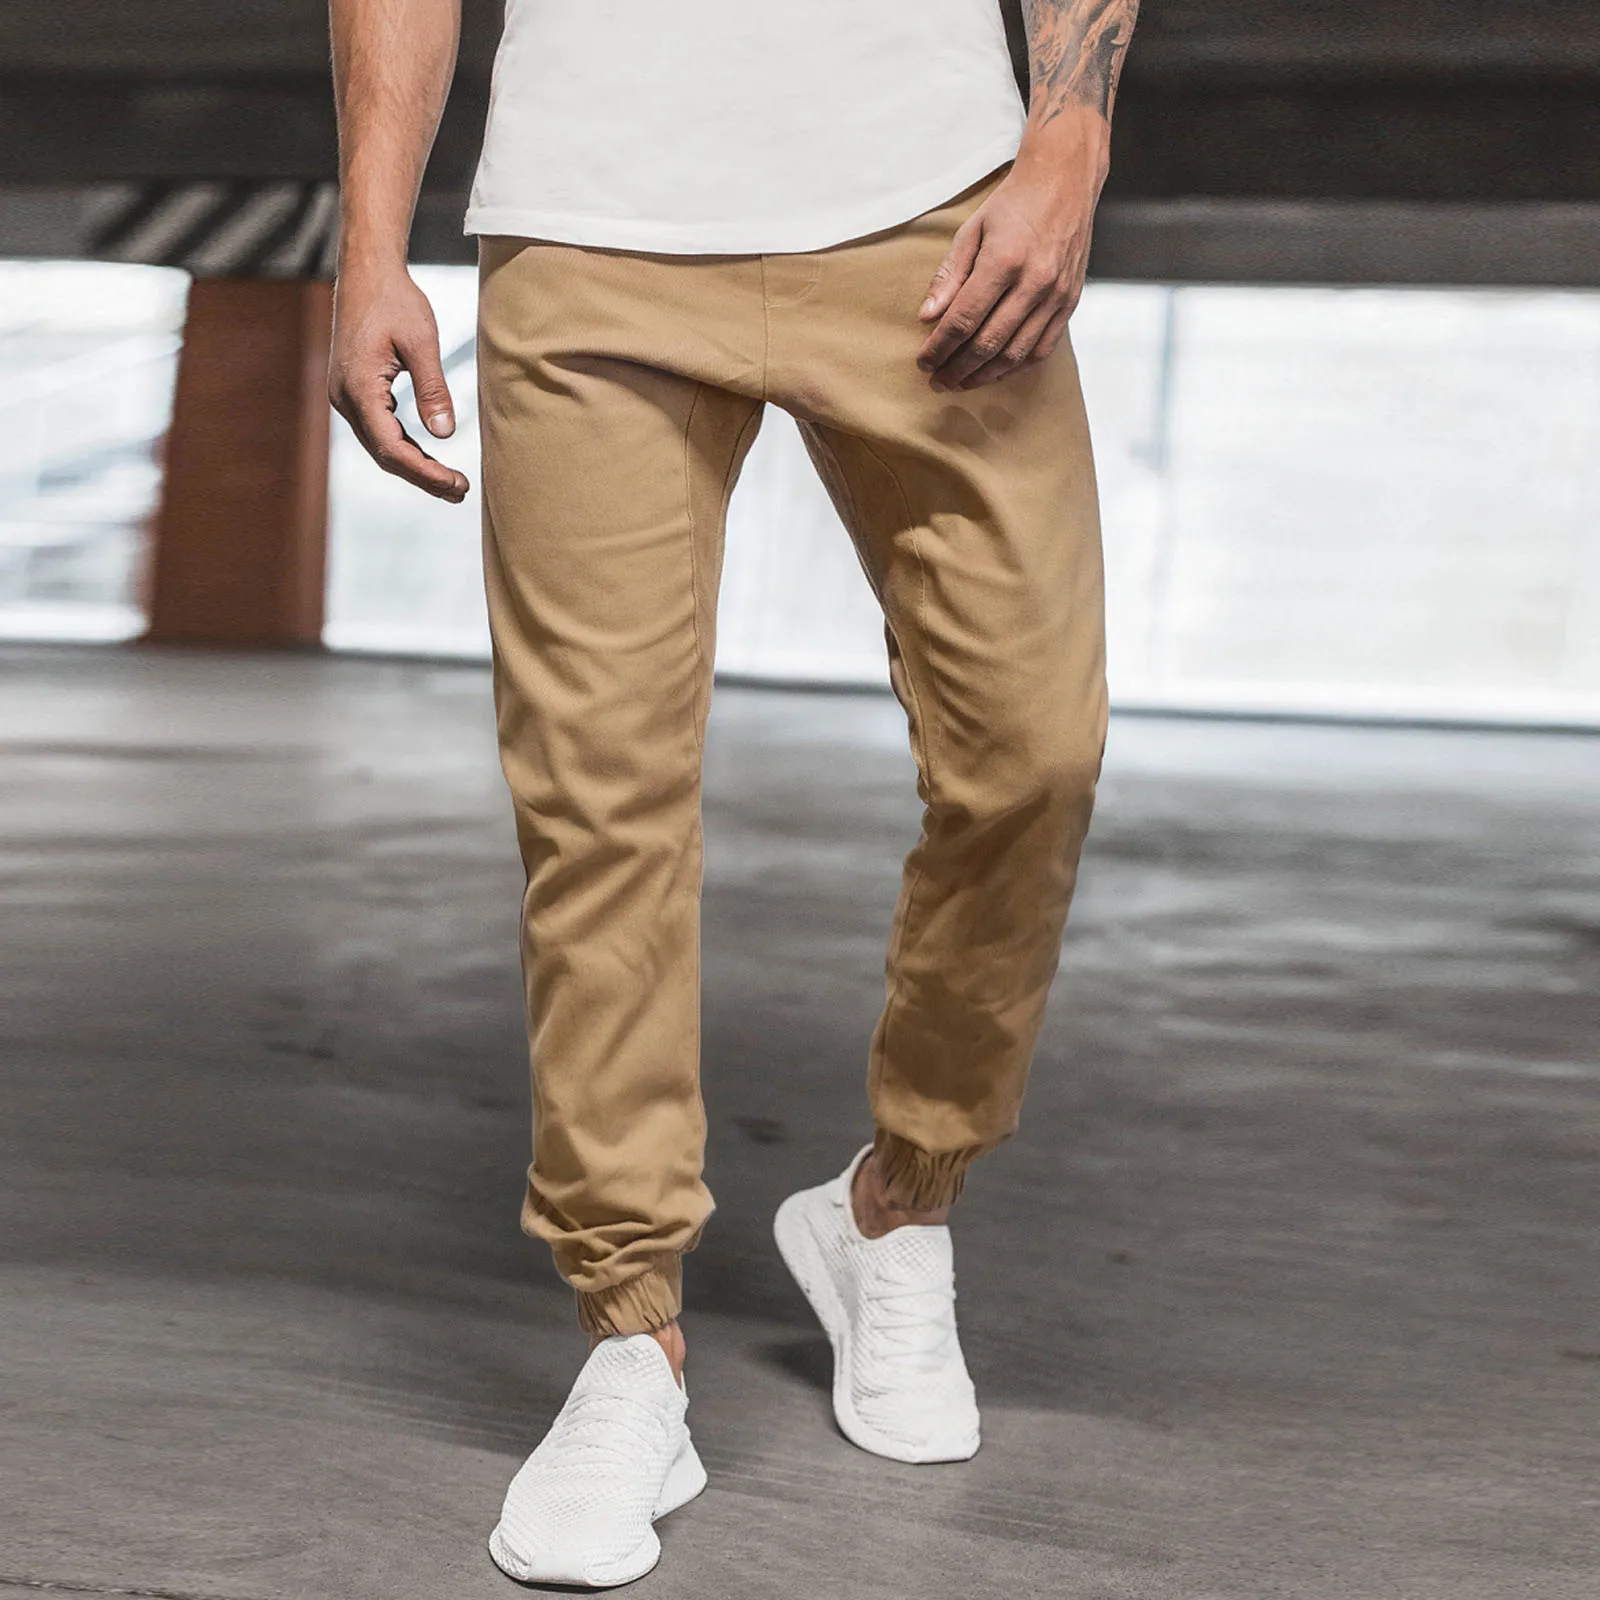 fartey Men Metallic Shiny Pant with Pockets Drawstring Slim Fit Trousers  Sparkle Pleated Elastic Waist Straight Leg Party Pants 